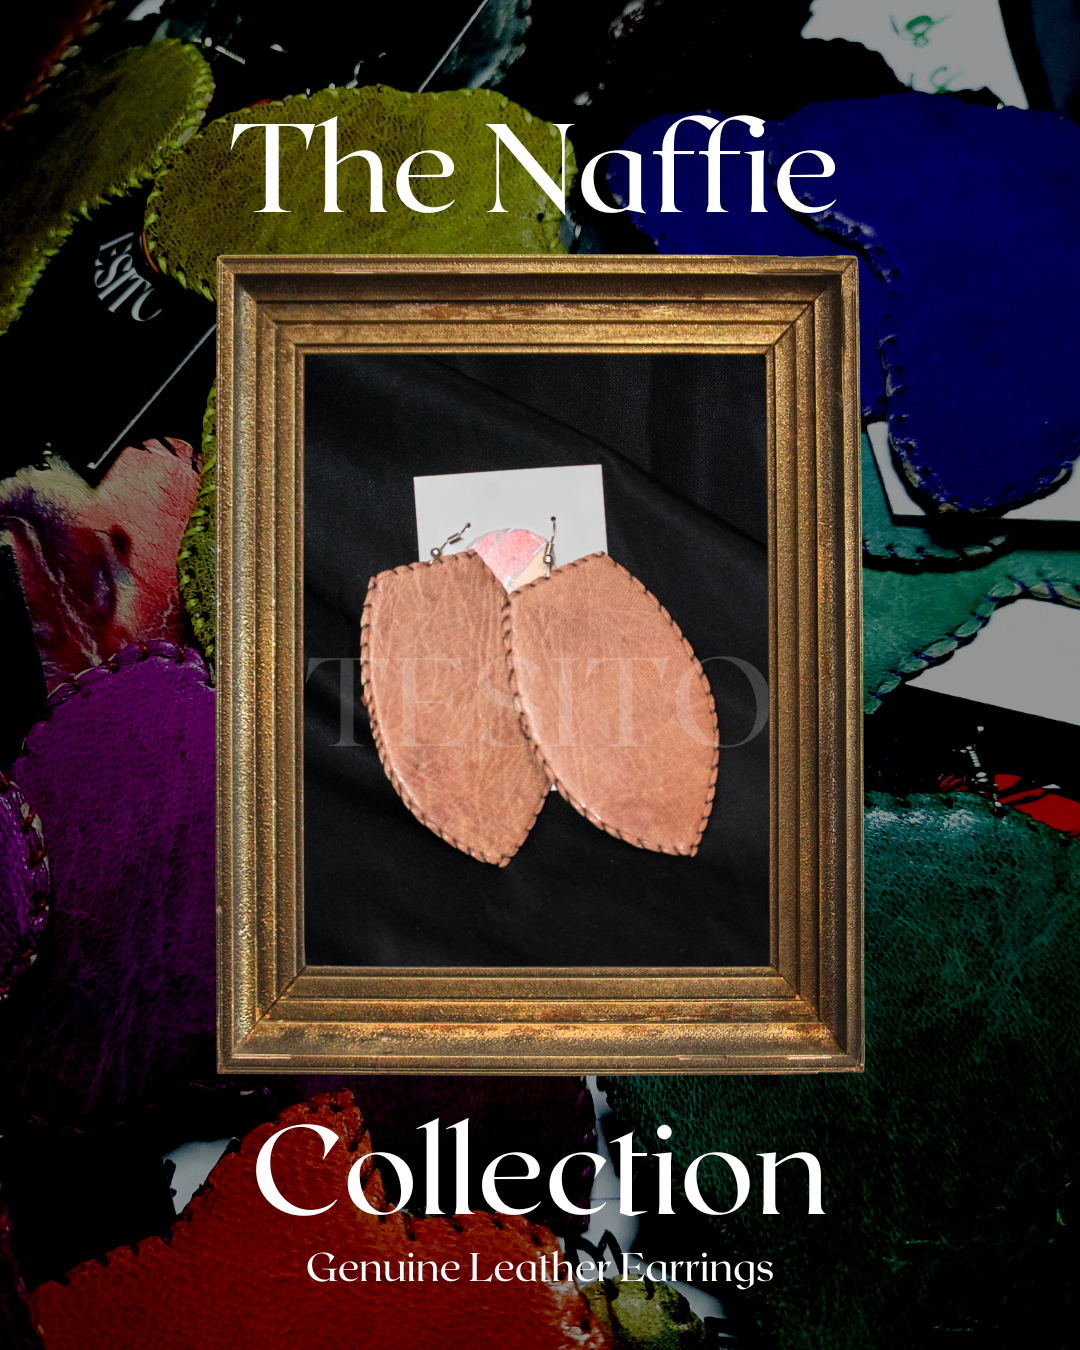 Toffee | Handmade Leather Earrings | The Naffie Collection